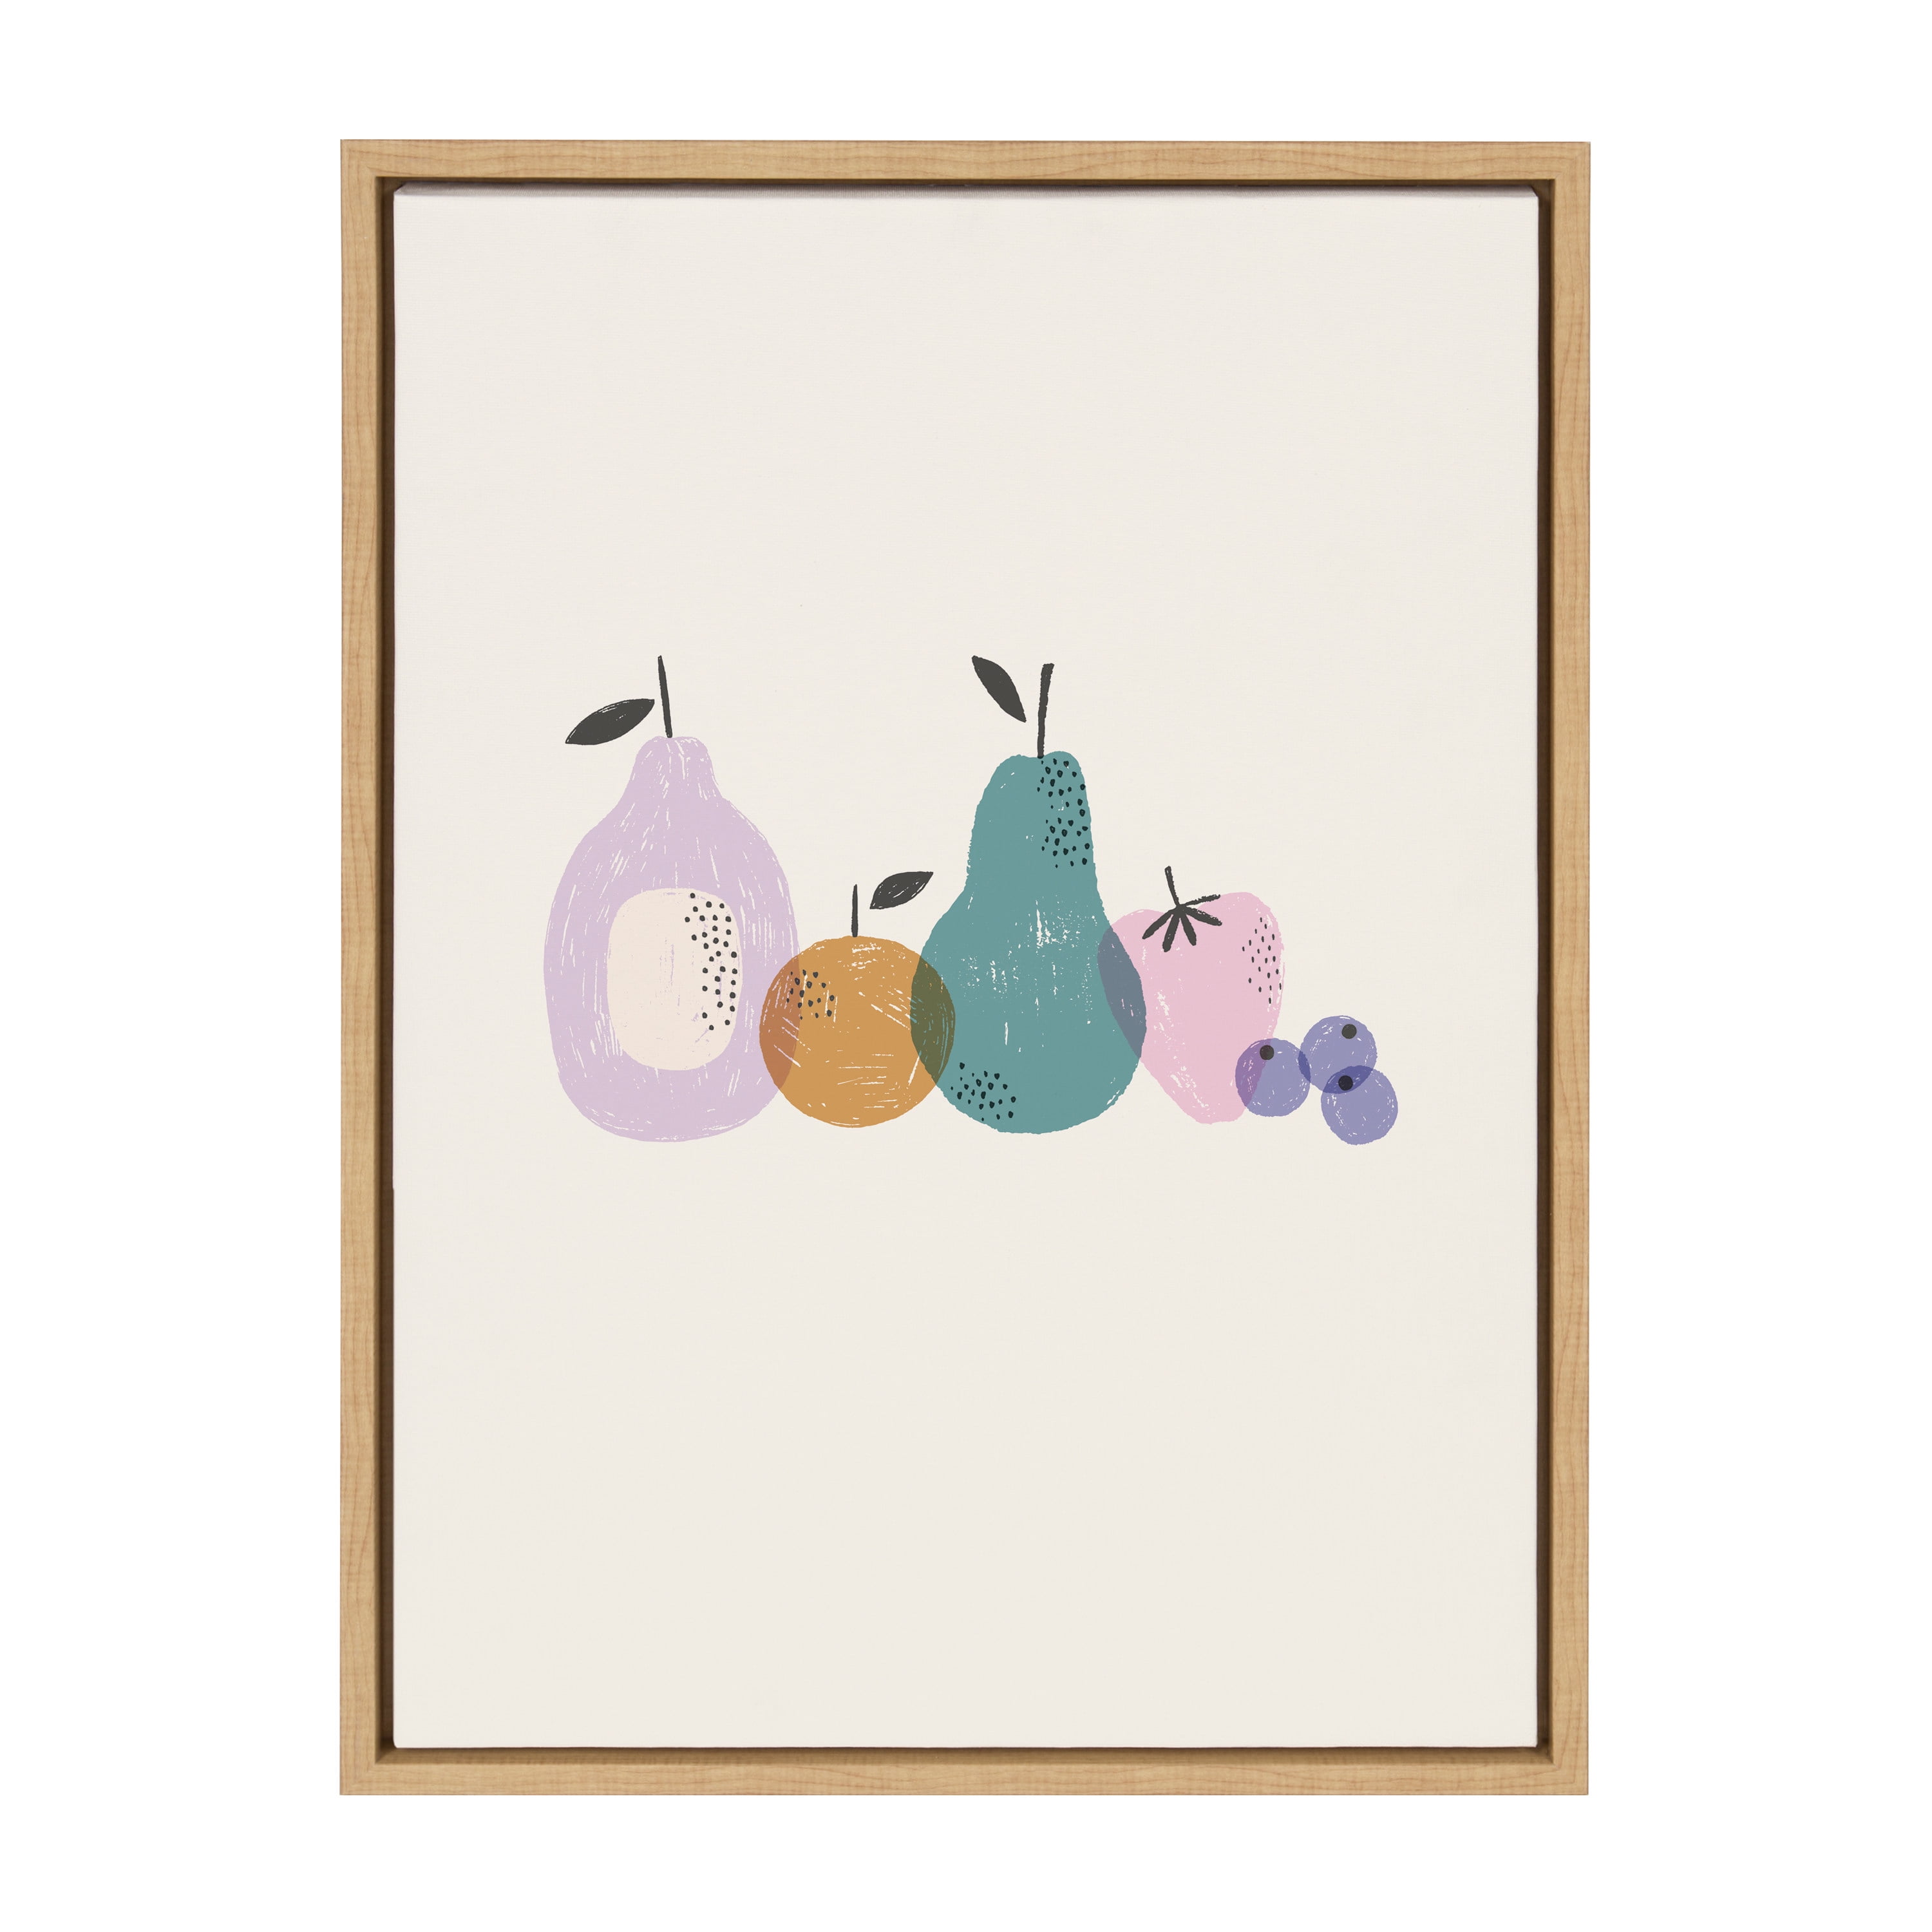 PEARS APPLES FRUITS VEGETABLES KITCHEN Canvas Wall Art Picture  F44  X MATAGA 